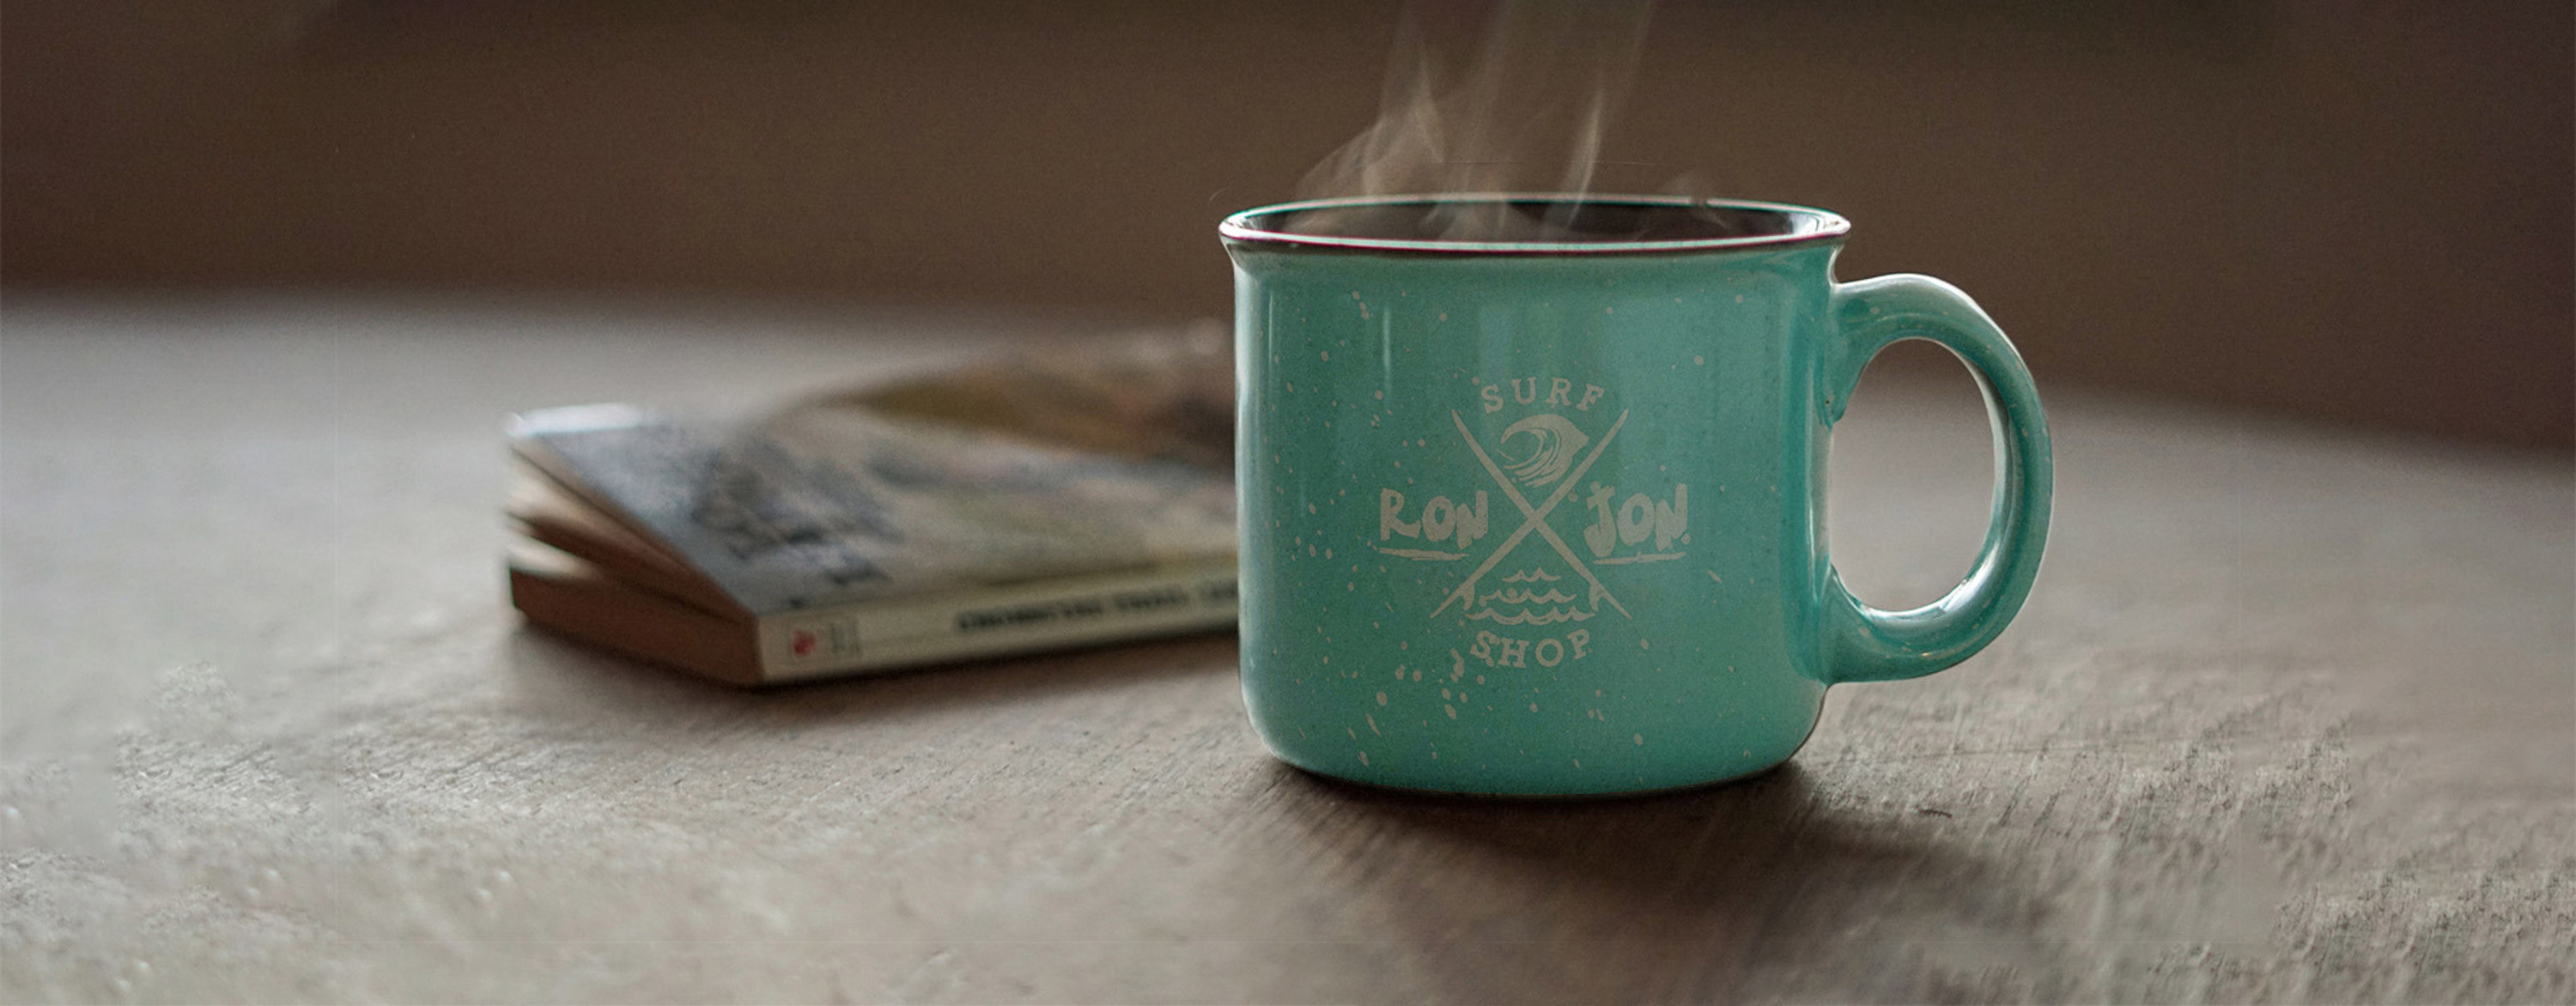 mug with steam on a table with a book in the background